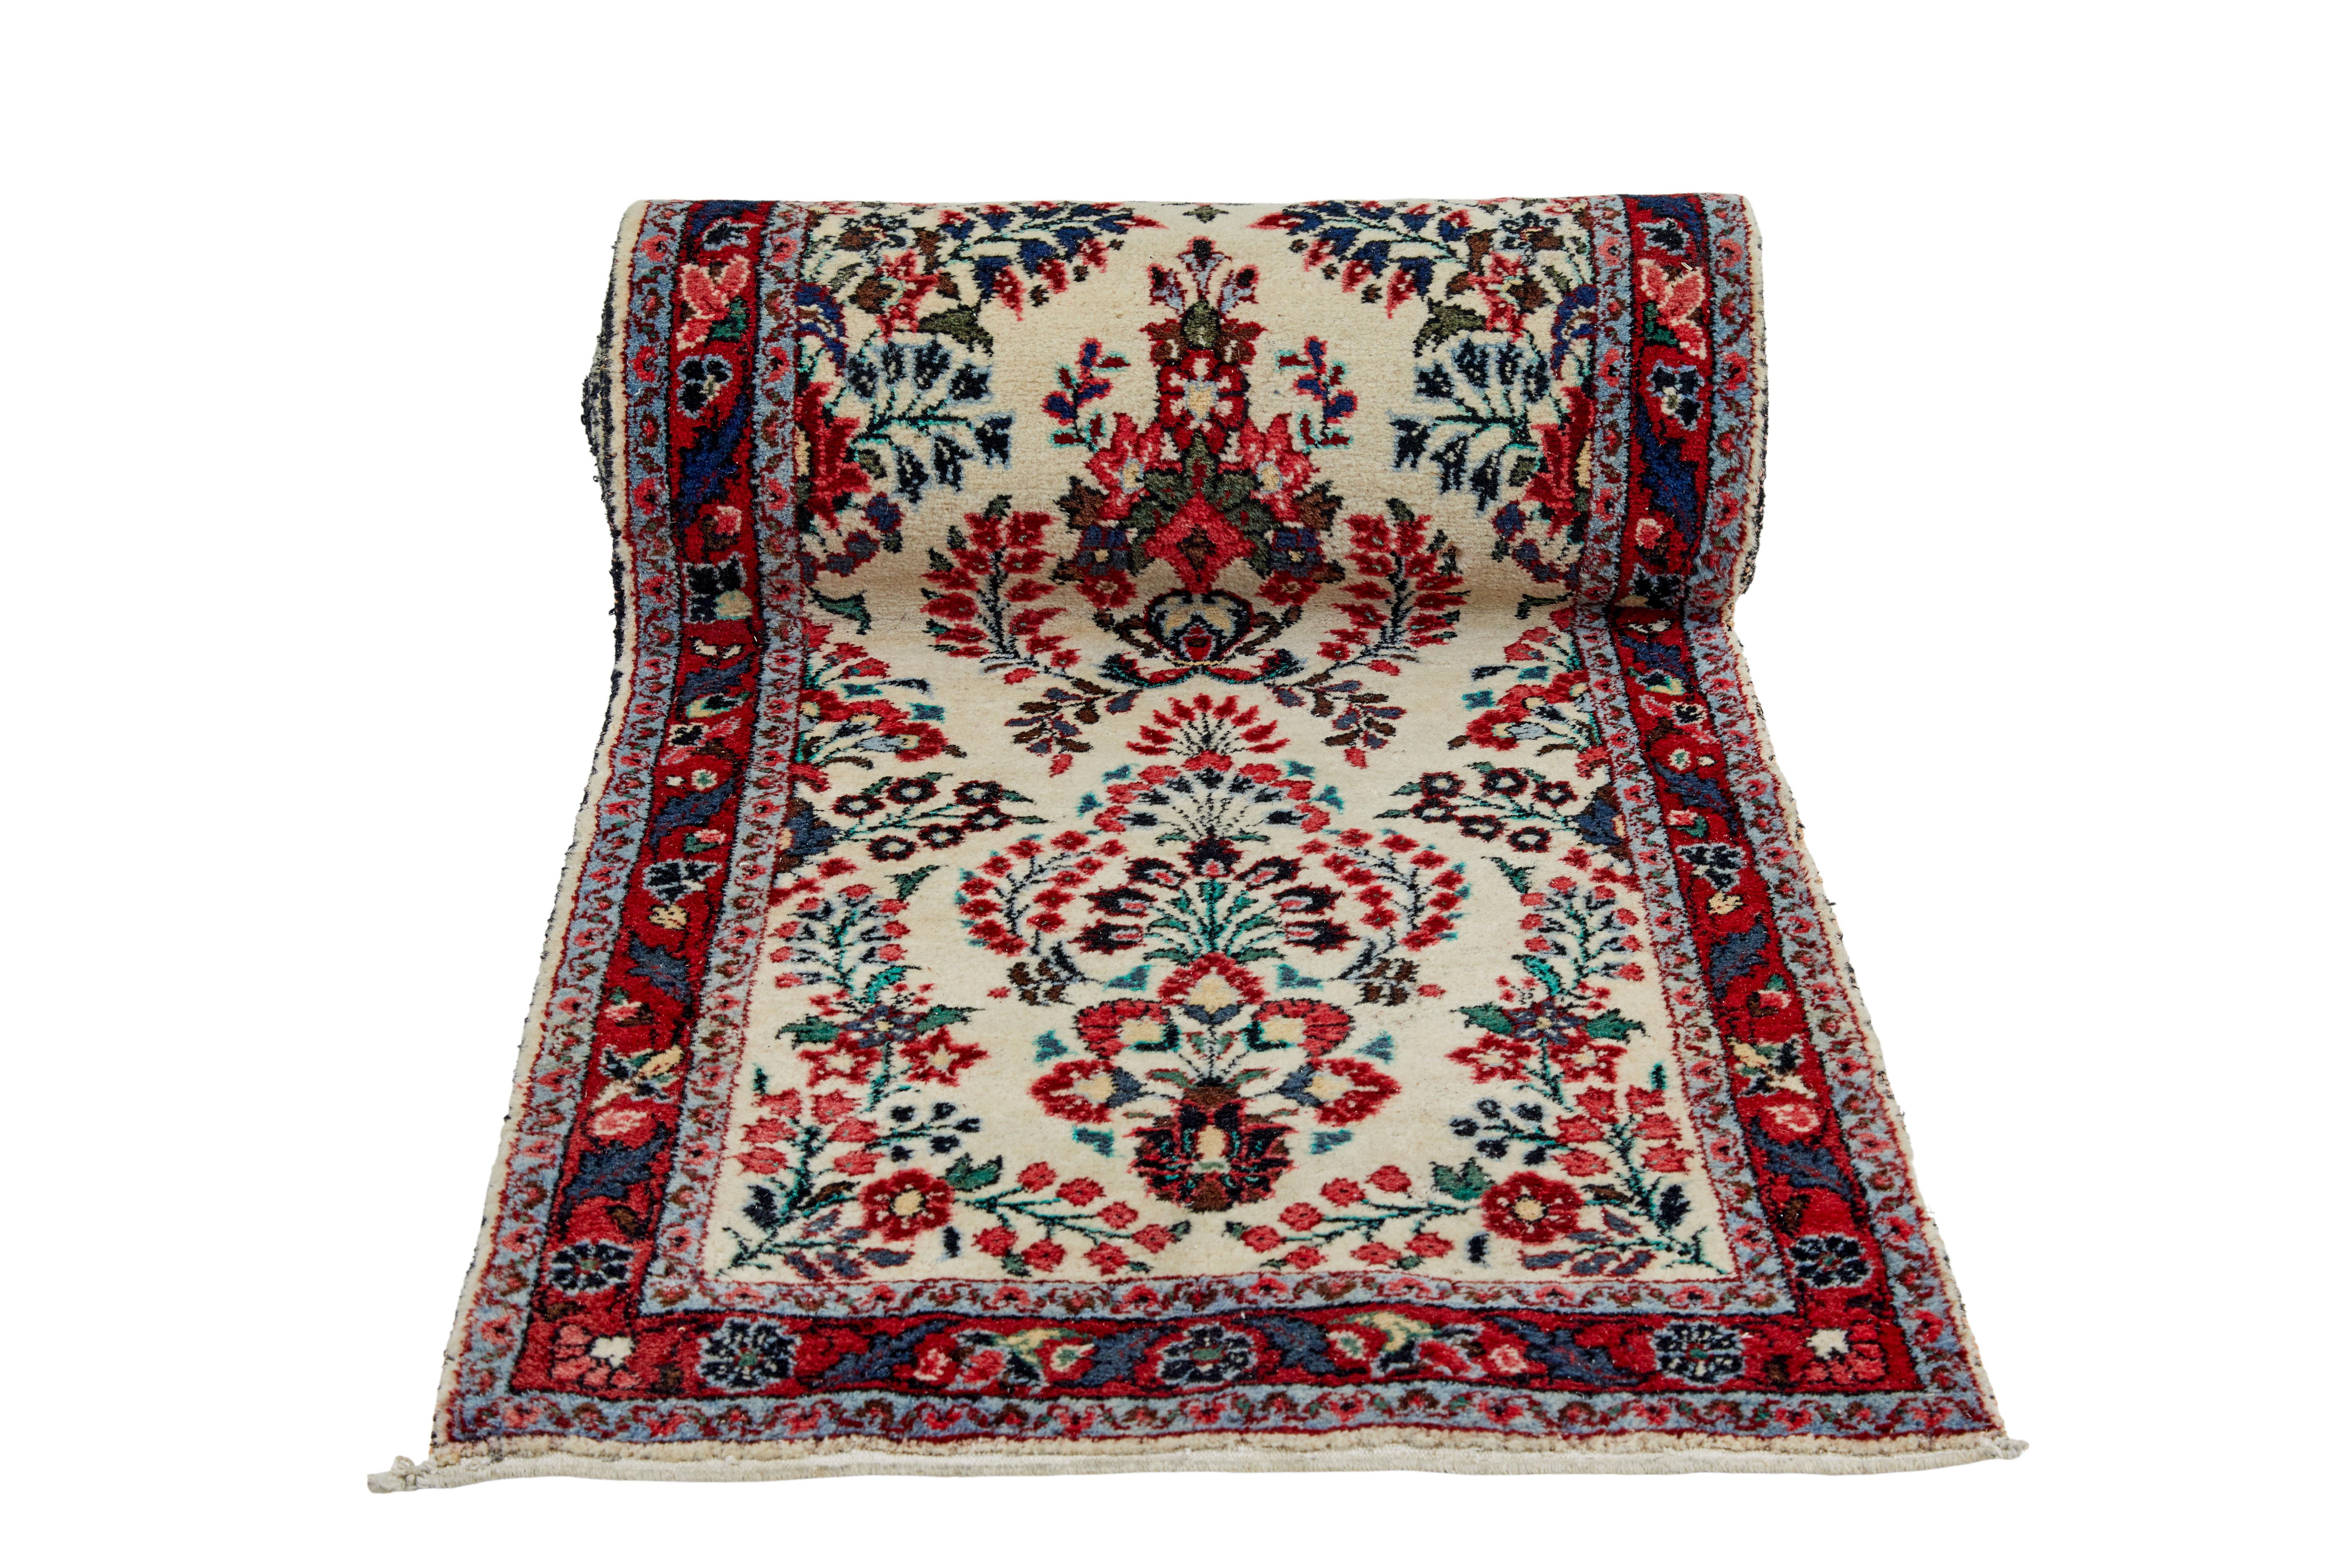 Victorian 20th century woven 31 foot long carpet runner For Sale